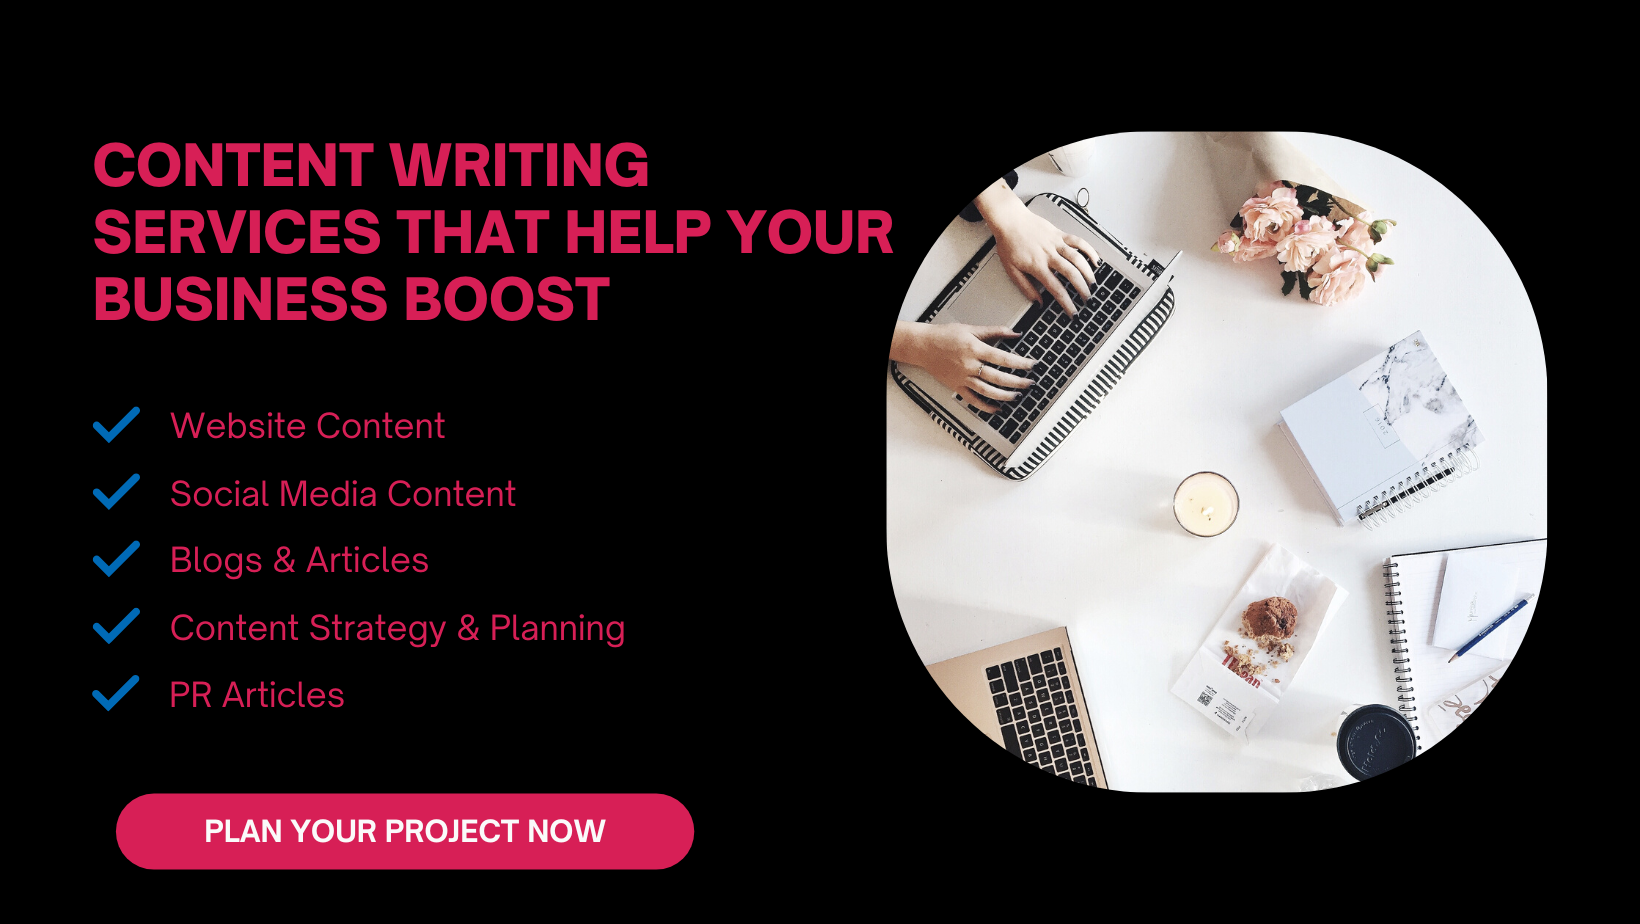 5 Content Writing Services That Help Your Business Boost